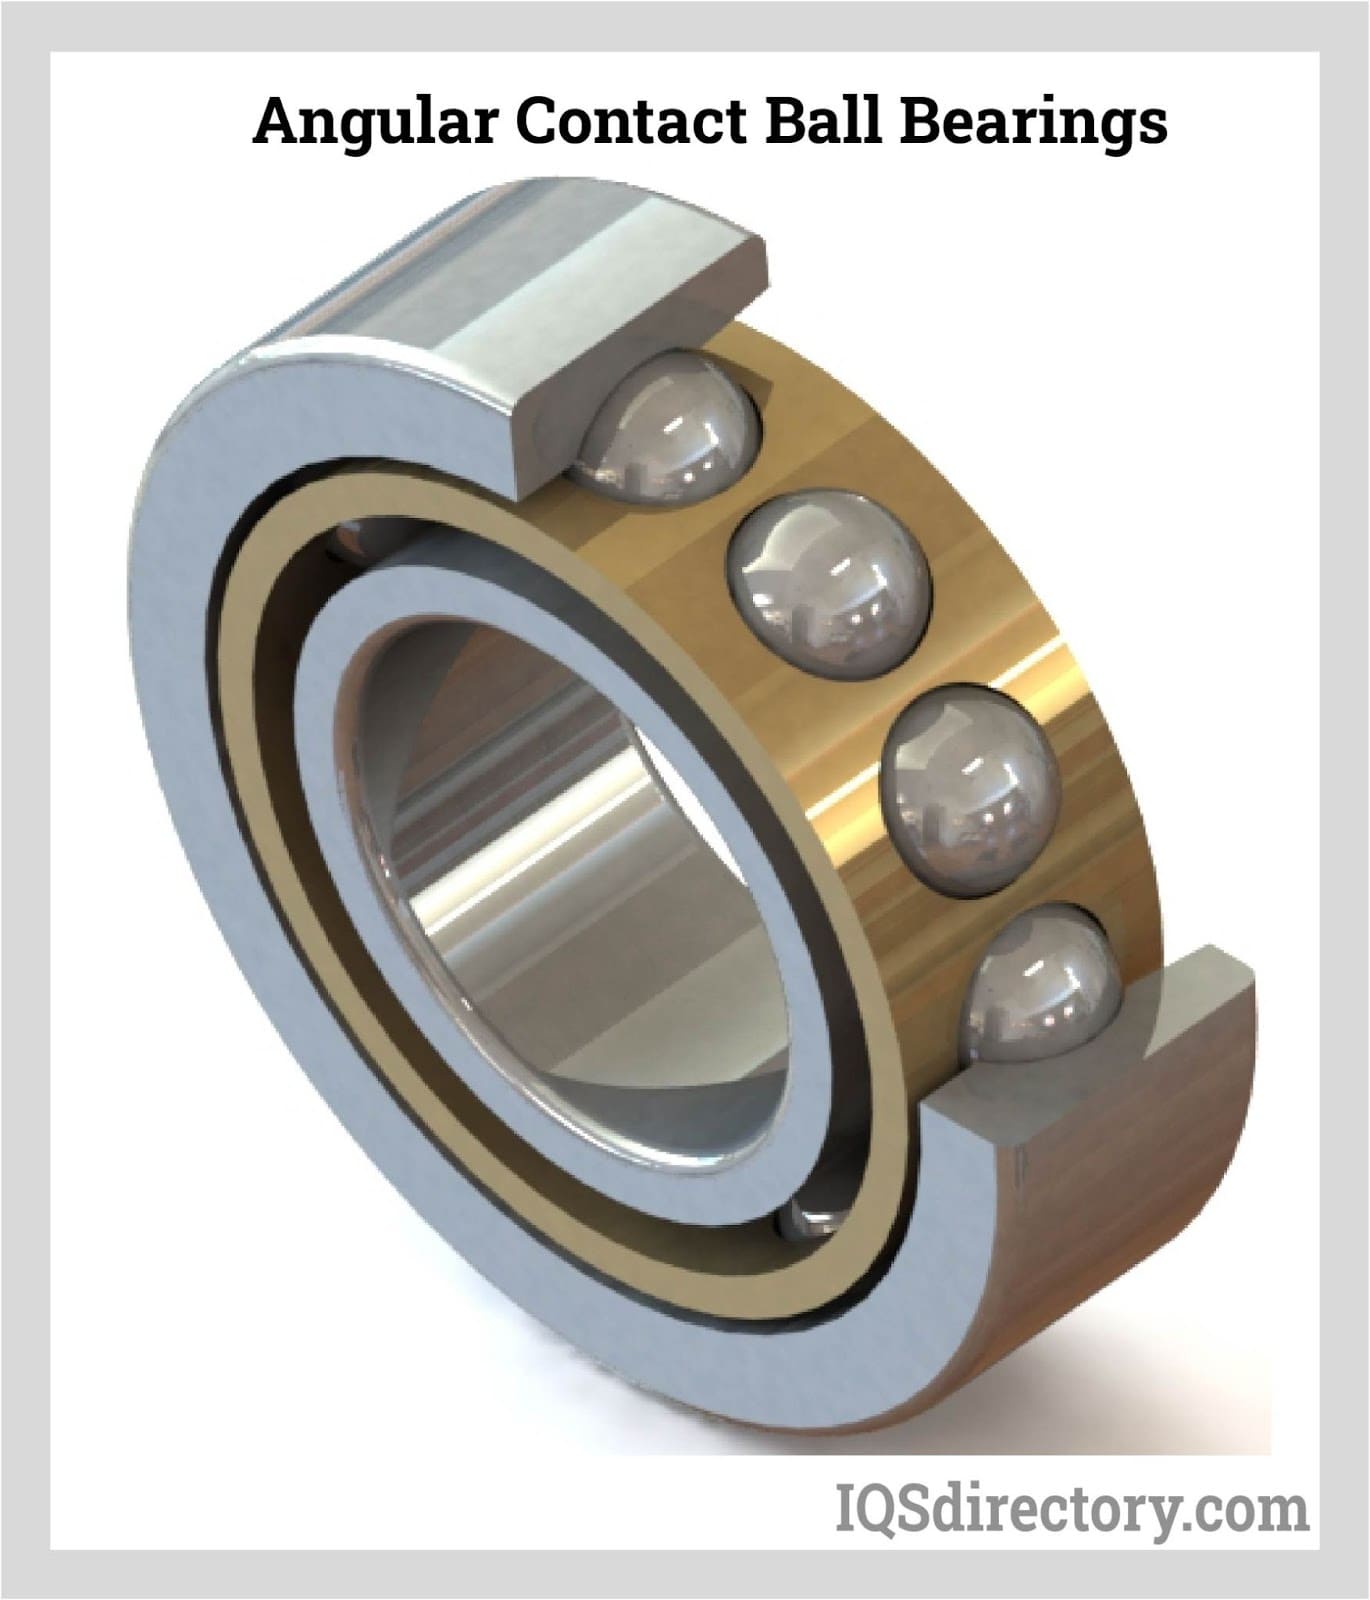 Different Types of Bearings Used in Rotating Equipment